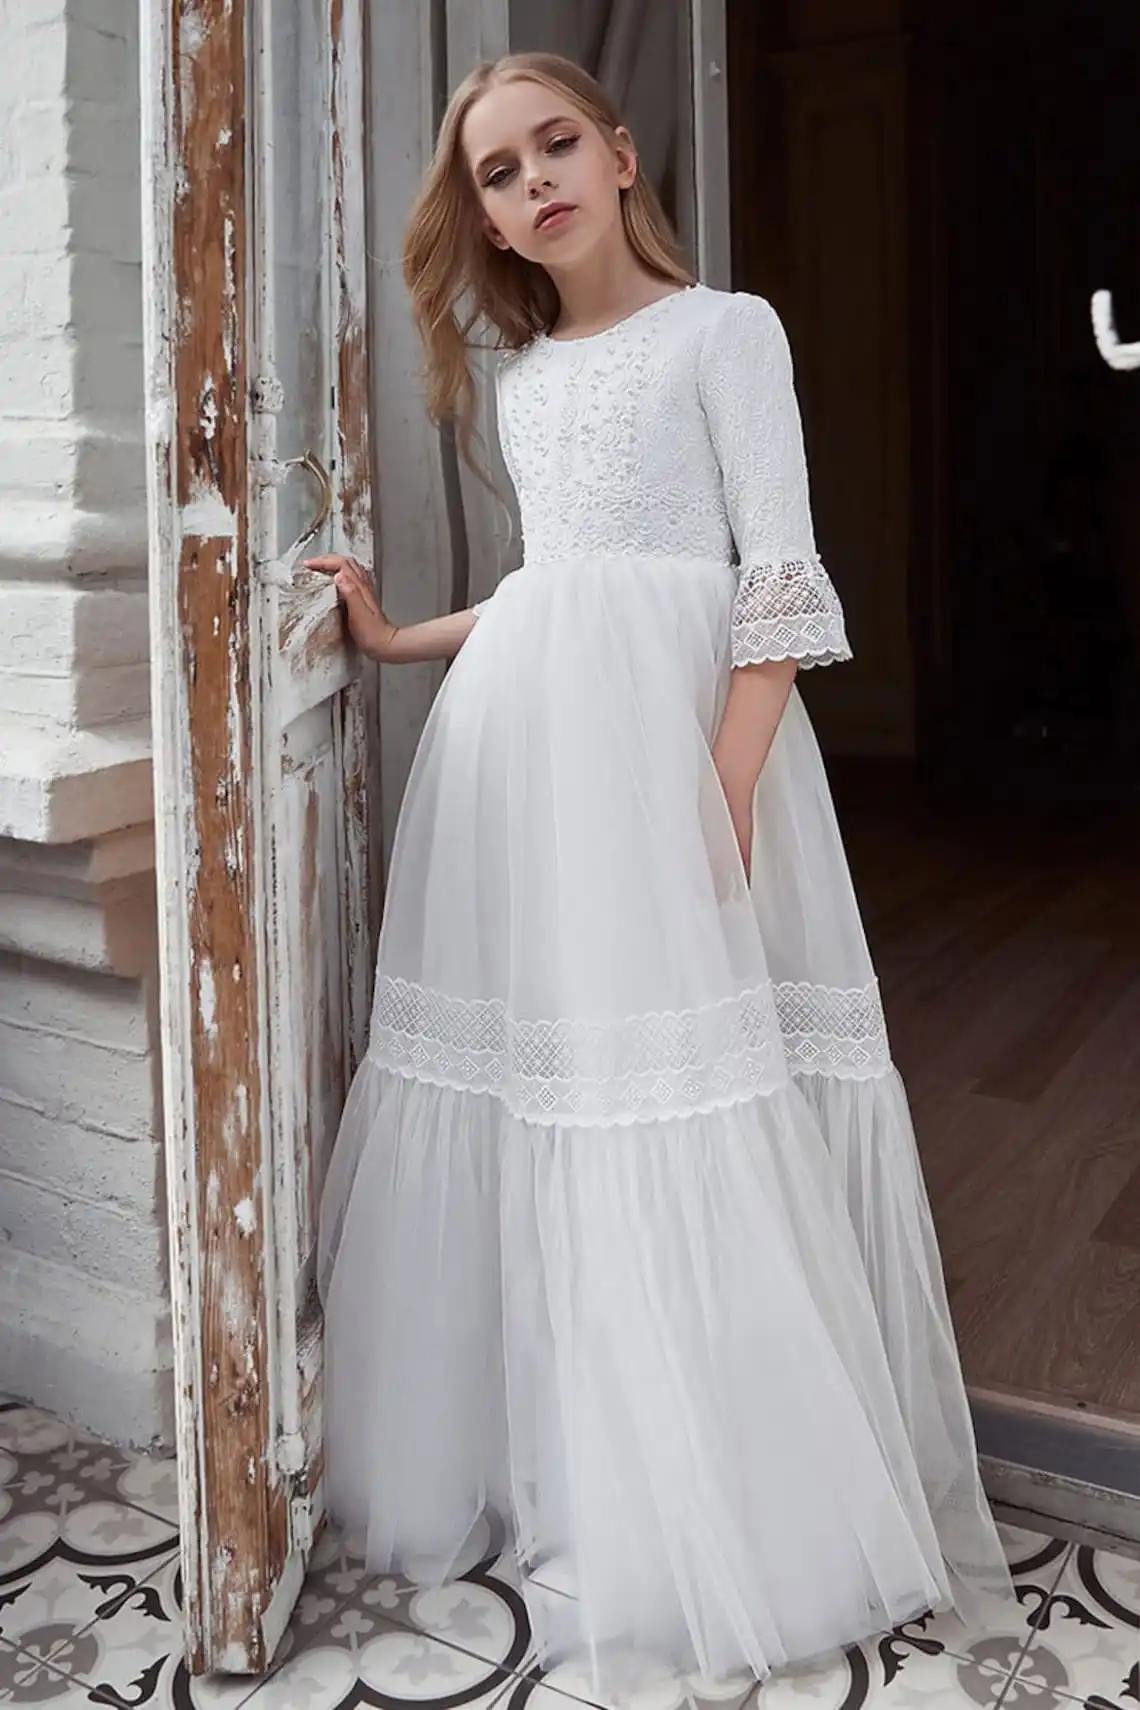 

Gorgeous Ivory Long Lace Flower Girl Dresses Pearls Half Sleeves Princess Holy First Communion Dress Tulle Wedding Party Dress